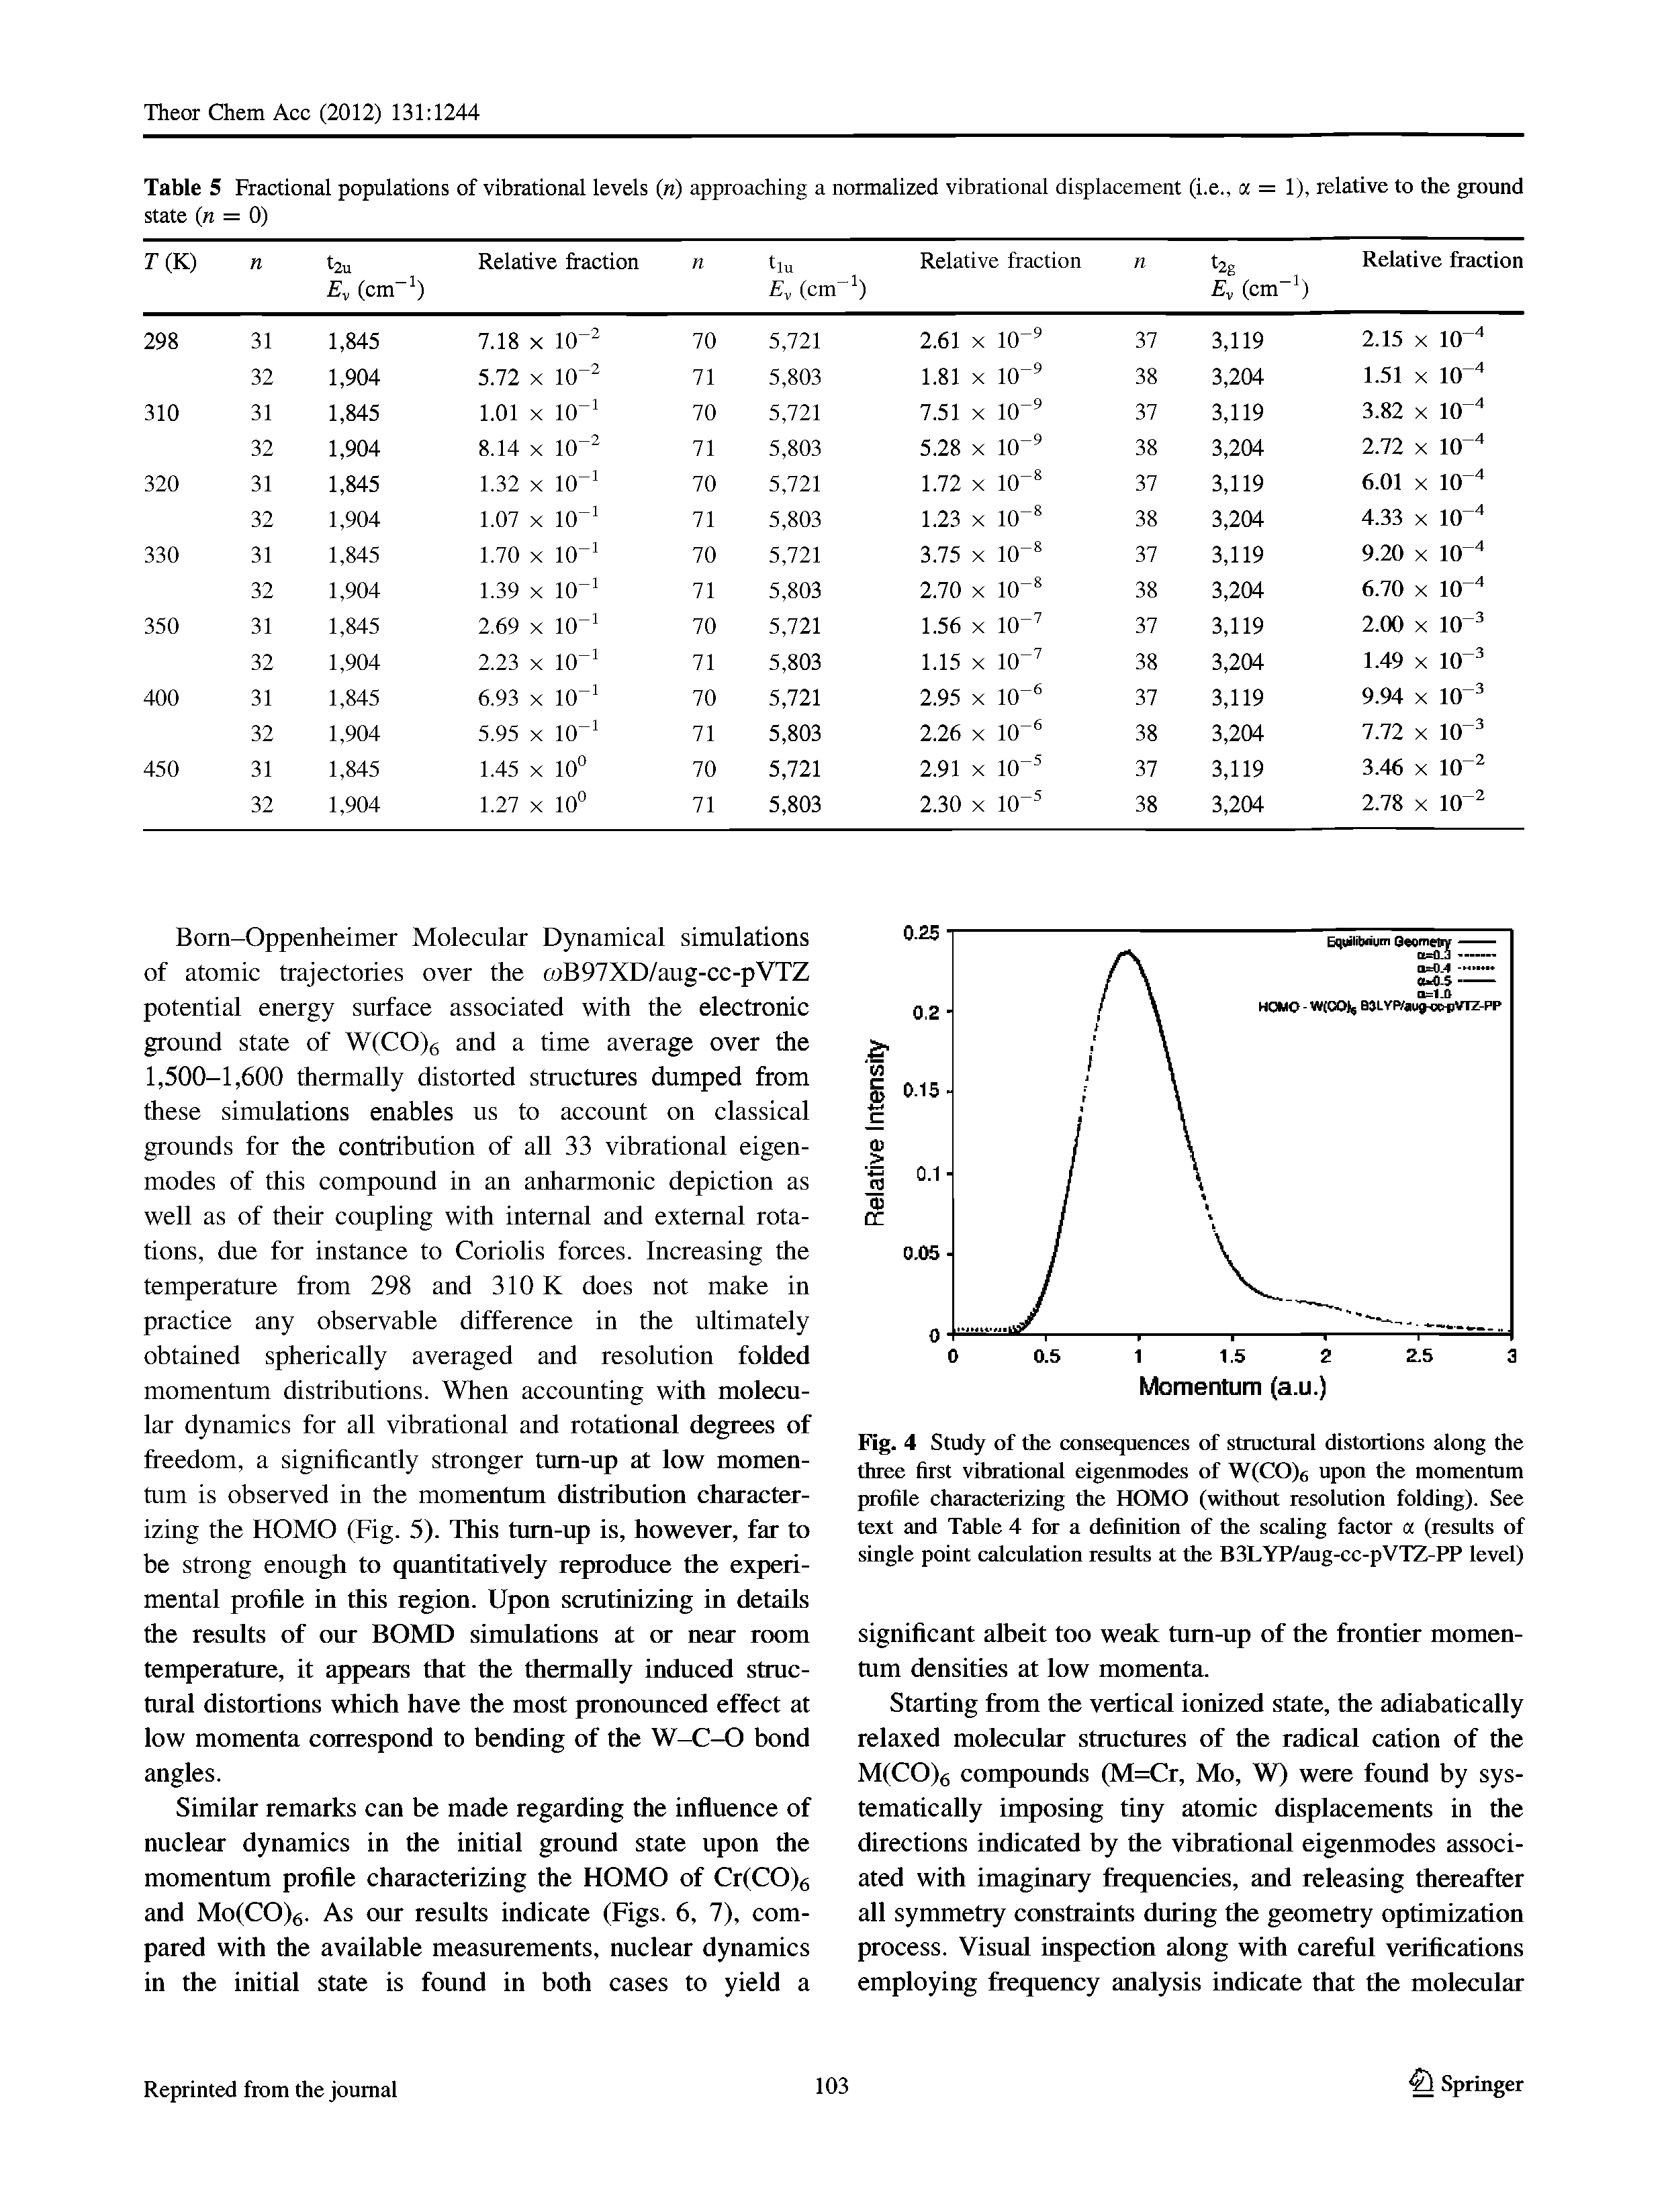 Fig. 4 Study of the consequences of structural distortions along the three first vibrational eigenmodes of W(CO>6 upon the momentum profile characterizing the HOMO (without resolution folding). See text and Table 4 for a definition of the scaling factor a (results of single point calculation results at the B3LYP/aug-cc-pVTZ-PP level)...